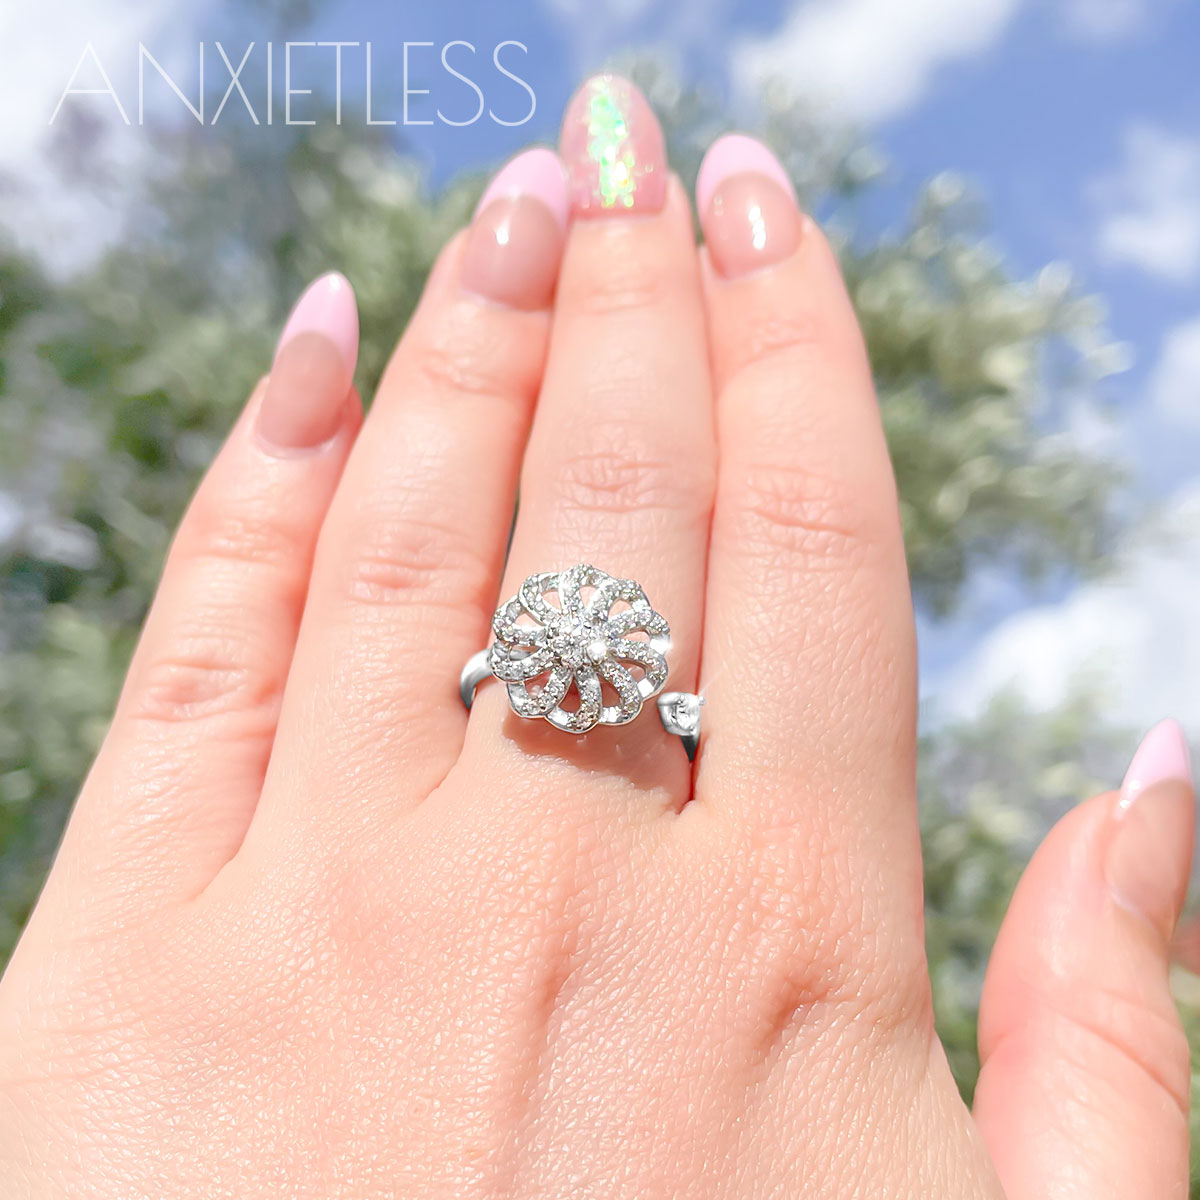 Woman wearing a silver coloured flower fidget ring, with a blurred background of sky and trees